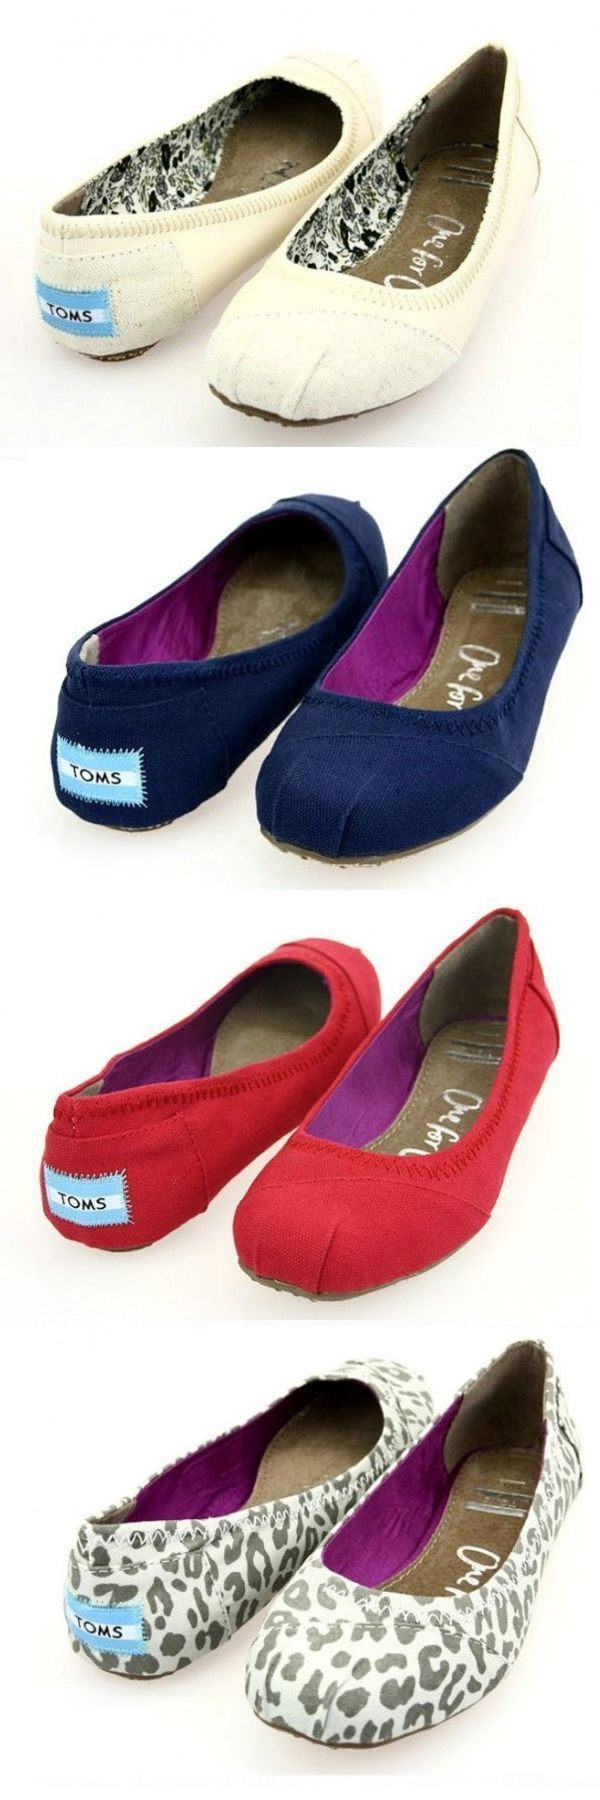 WOW, it is so cool. I also want to own one. Toms shoes.$19.50